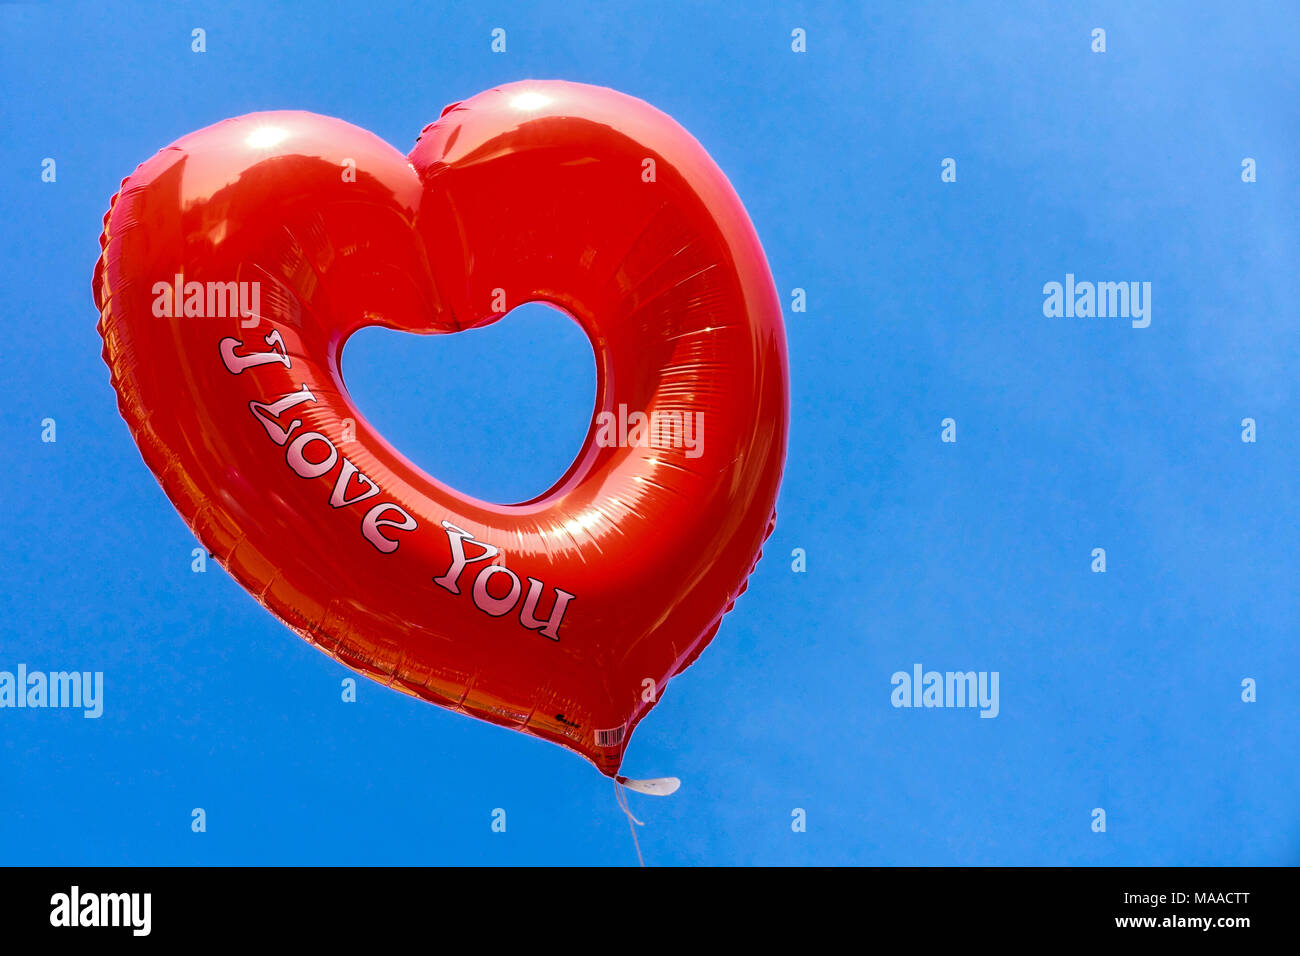 I love you, red inflatable love heart balloon Stock Photo